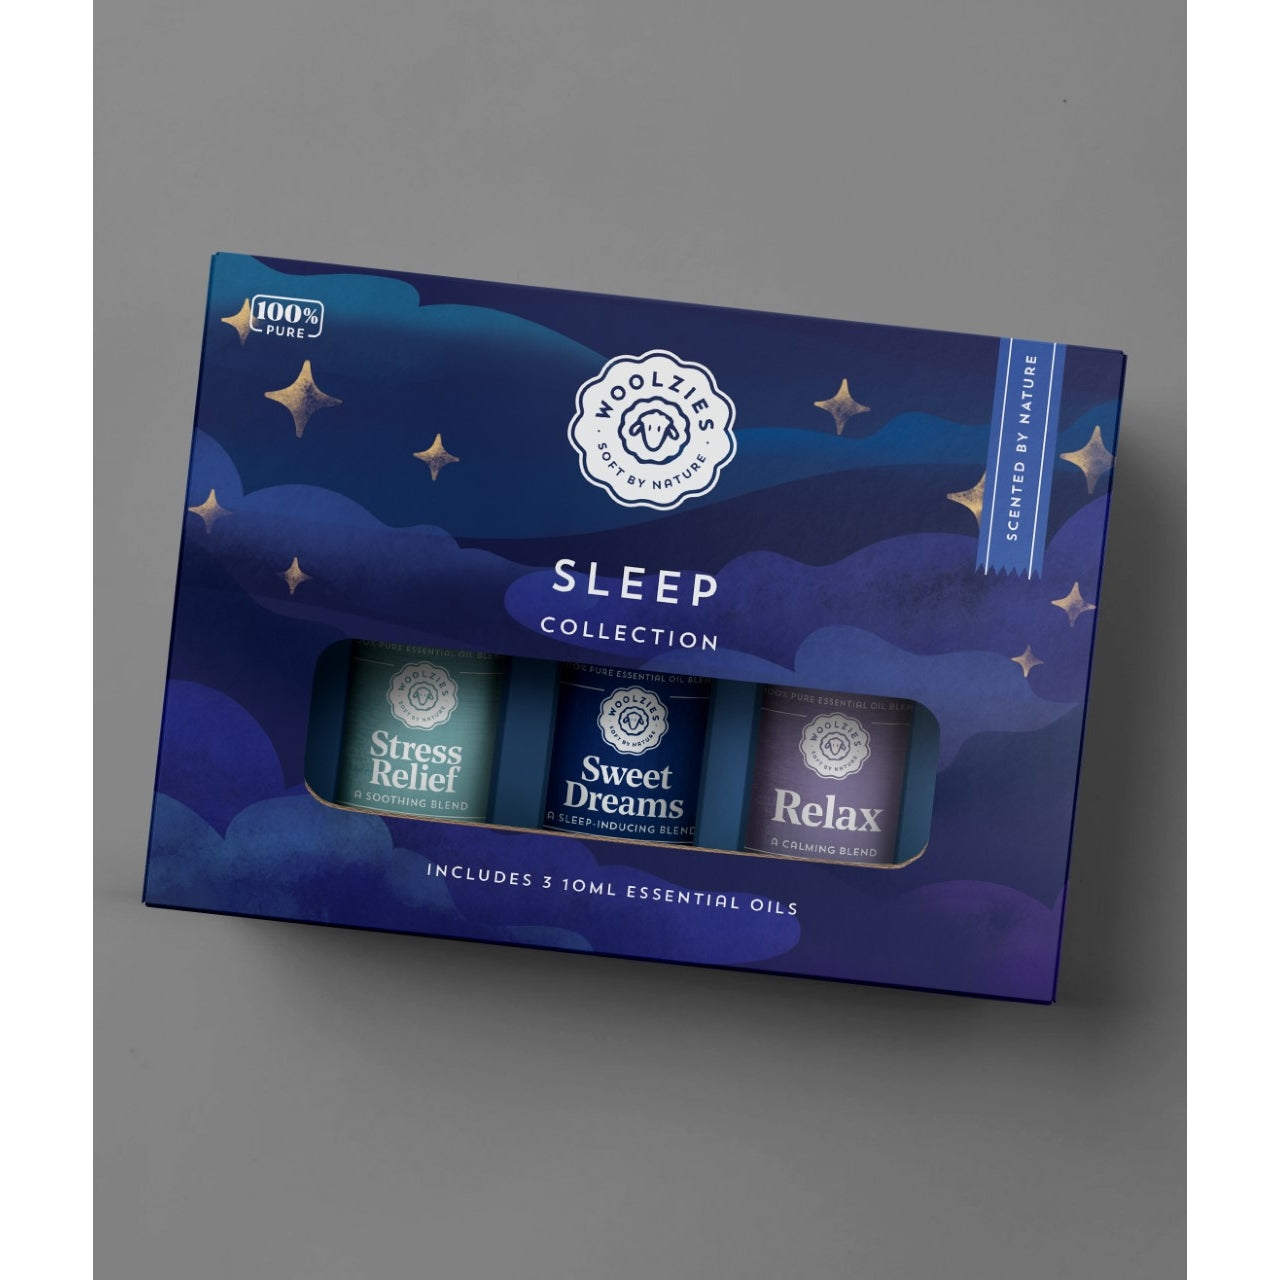 The Deep sleep Essential Oil Collection